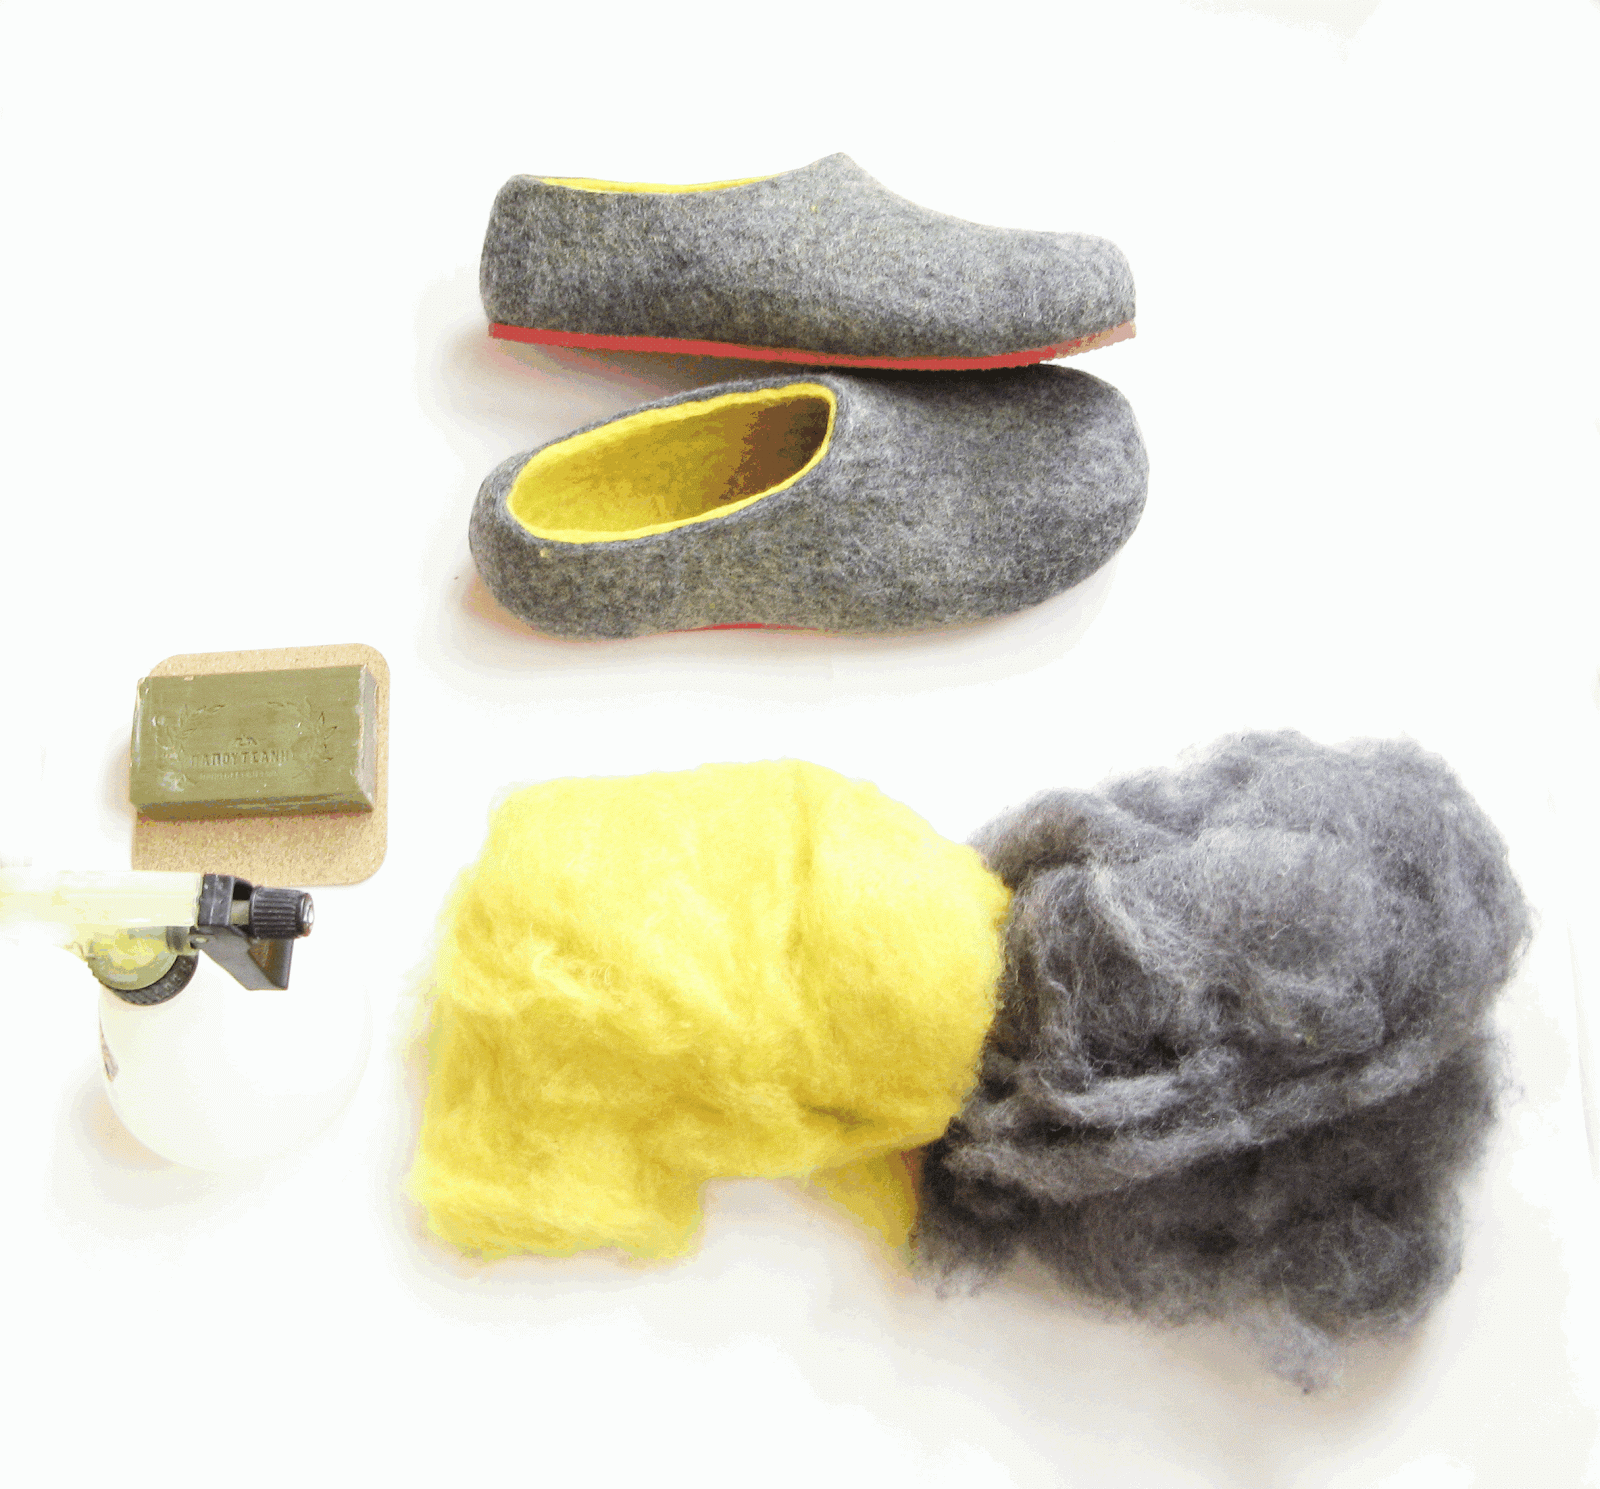 klo 鍔 Citere Felted Wool Slippers, Wool Boots, Cat Beds: How to make felted slippers